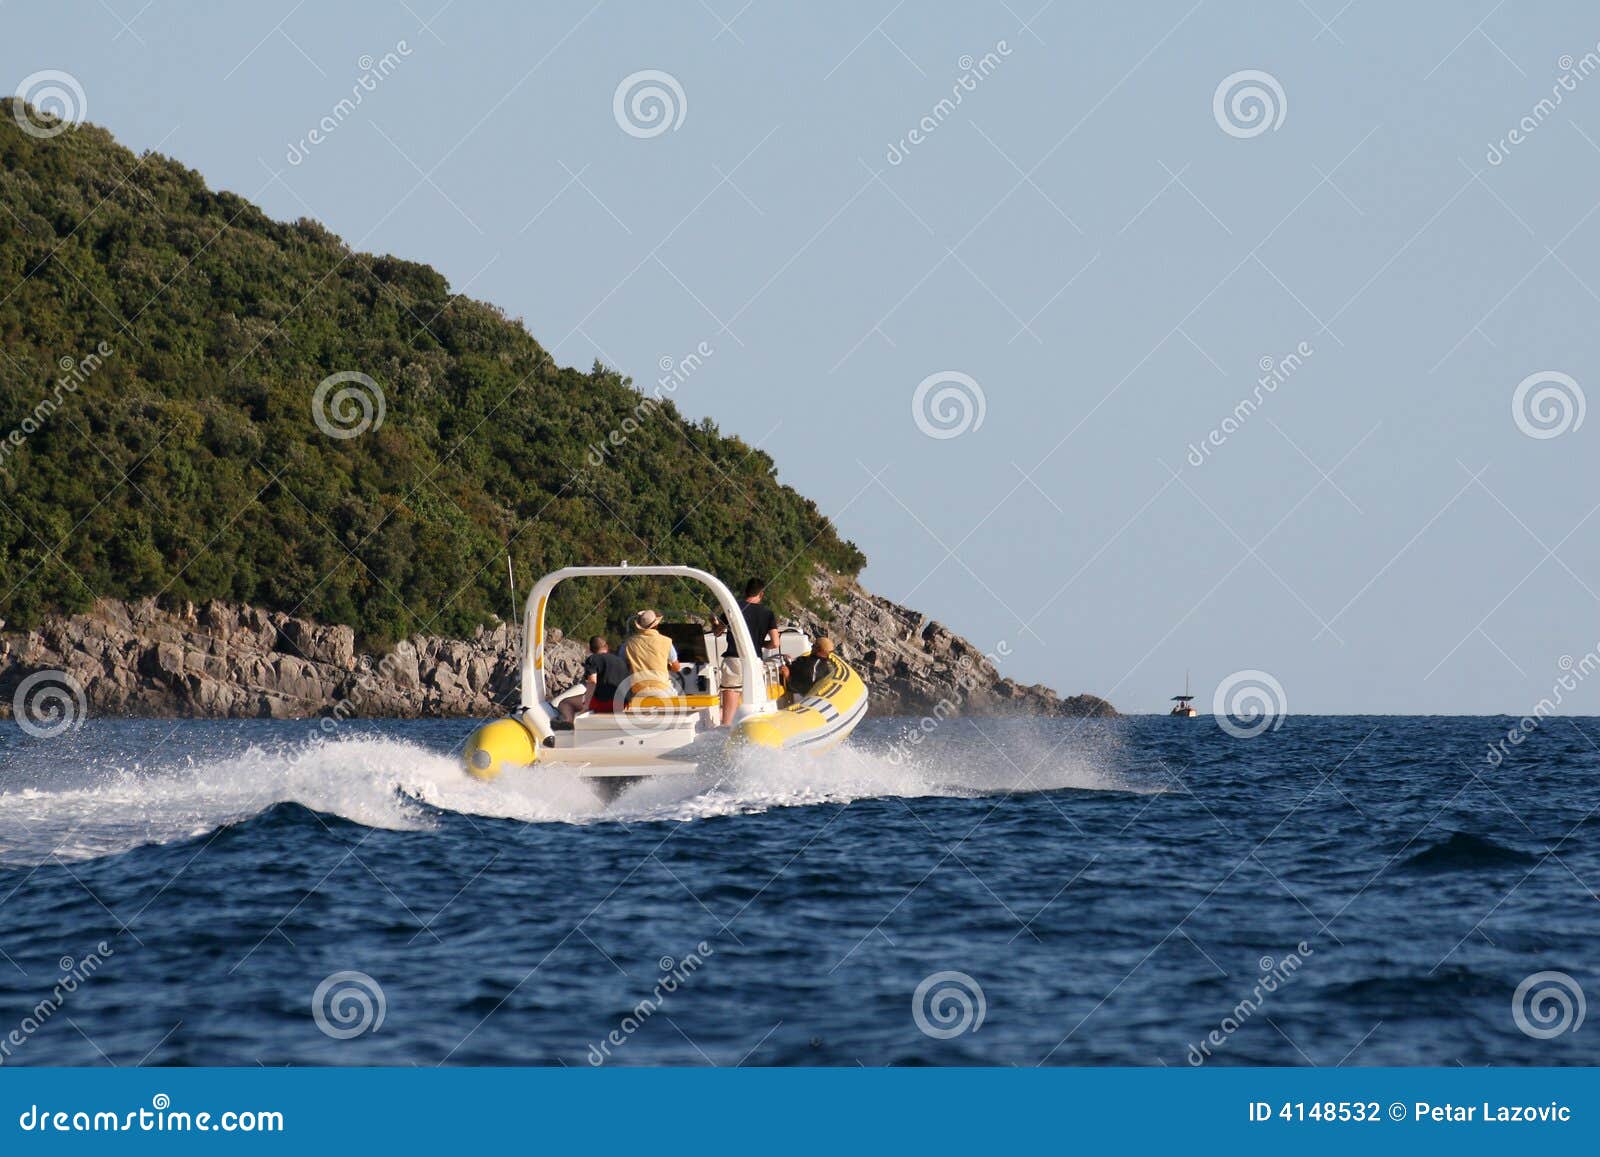 Small Boat On Choppy Water Stock Photography - Image: 4148532